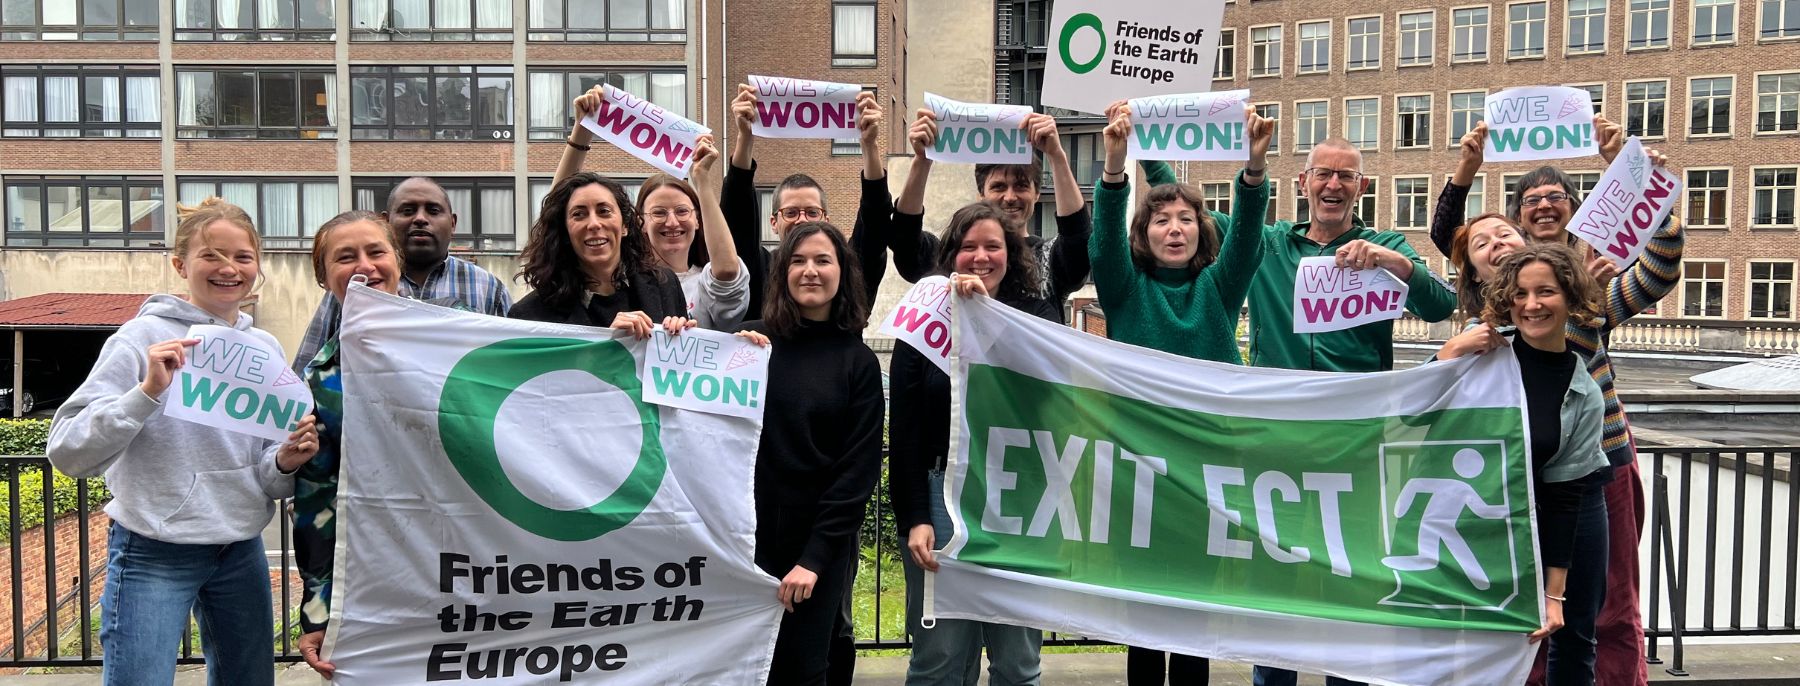 A group of people celebrating outdoor the EU Parliament voting forexiting the ECT,holding signis saying "we won!", a banner saying "Exit ECT" and flags with the Friends of the Earth Europe logo